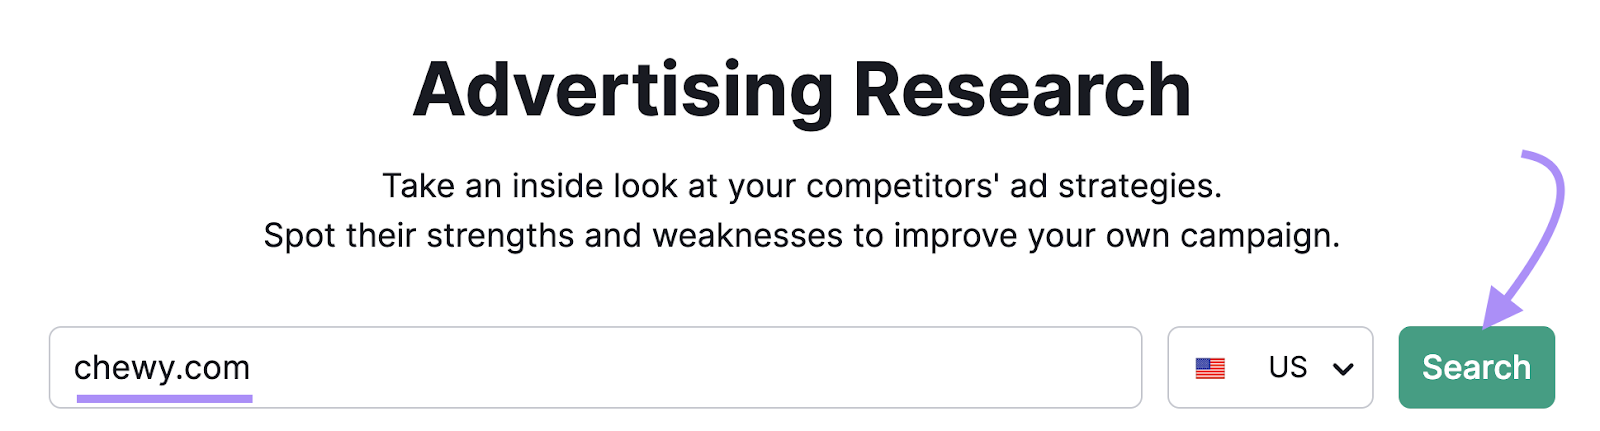 "chewy.com" entered into Advertising Research search bar